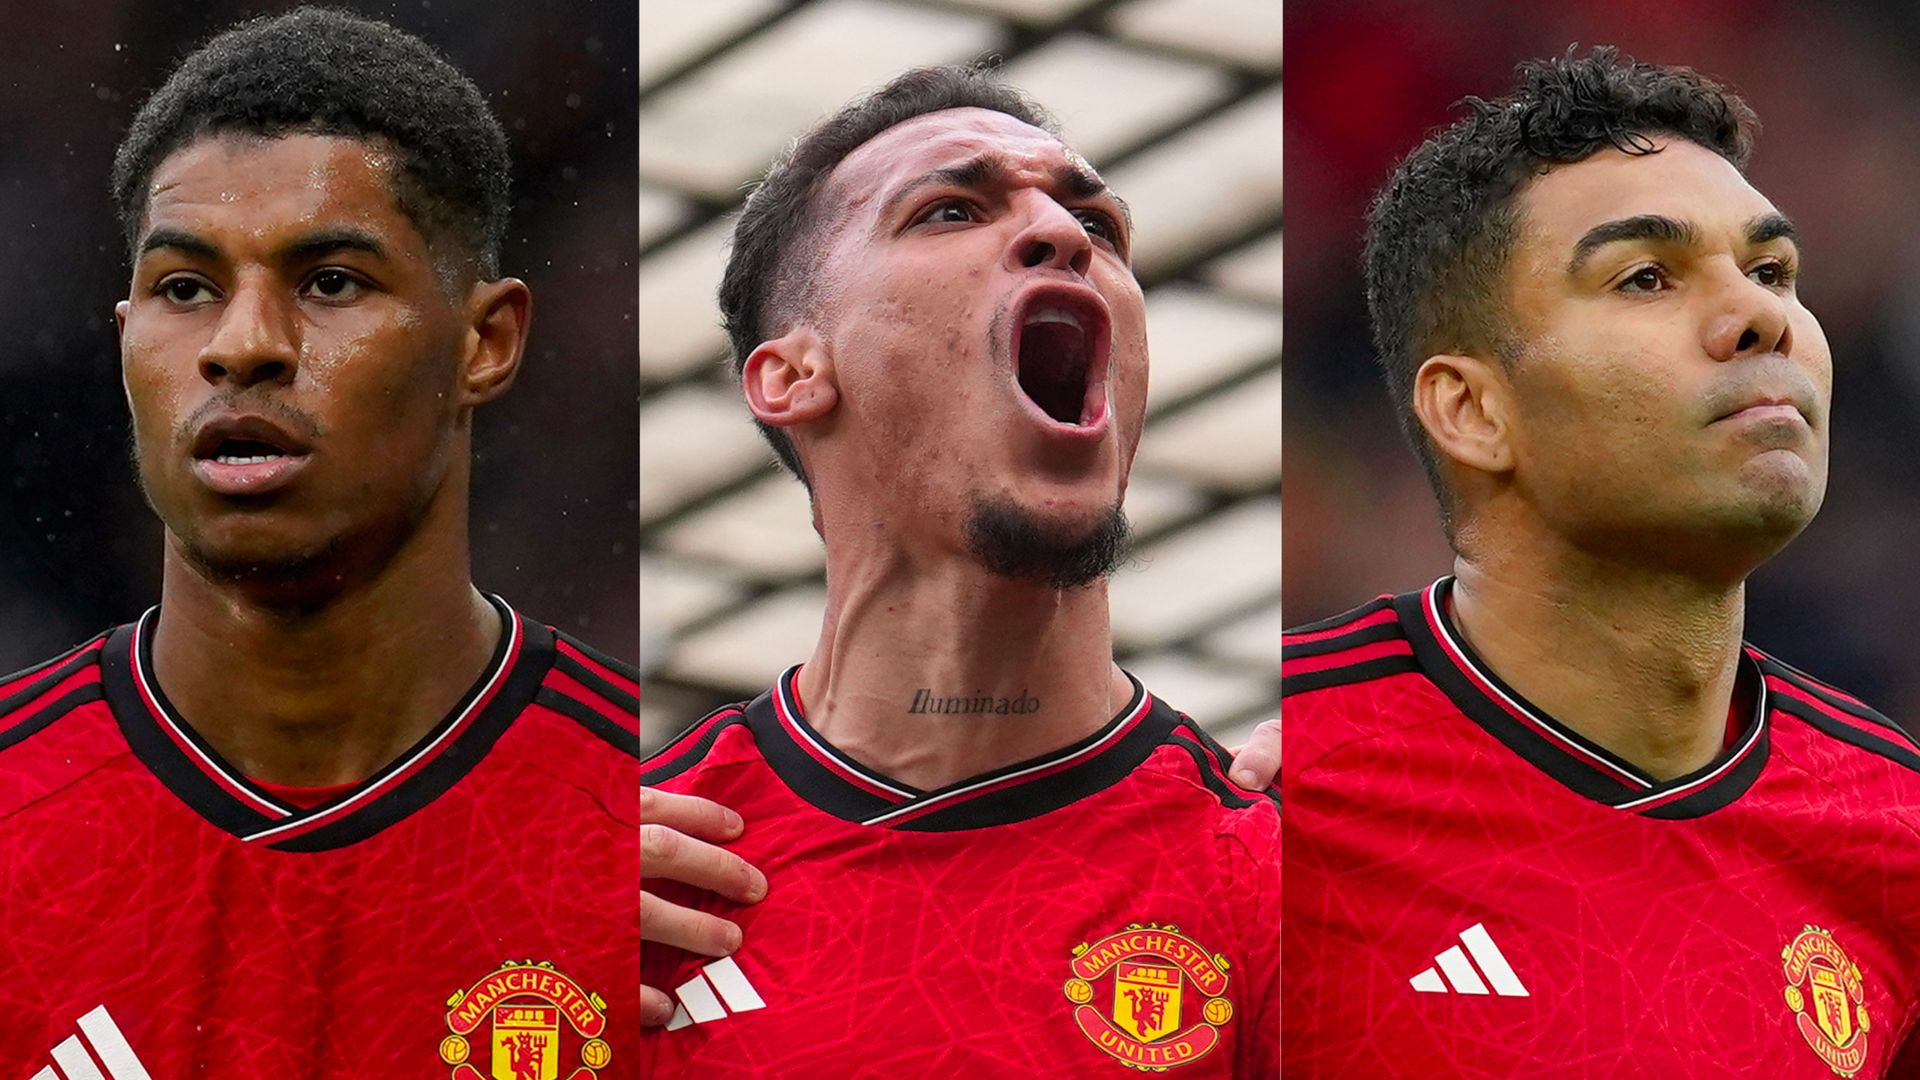 'Man Utd prepared to sell most of squad' - Who stays, who goes? You decide...